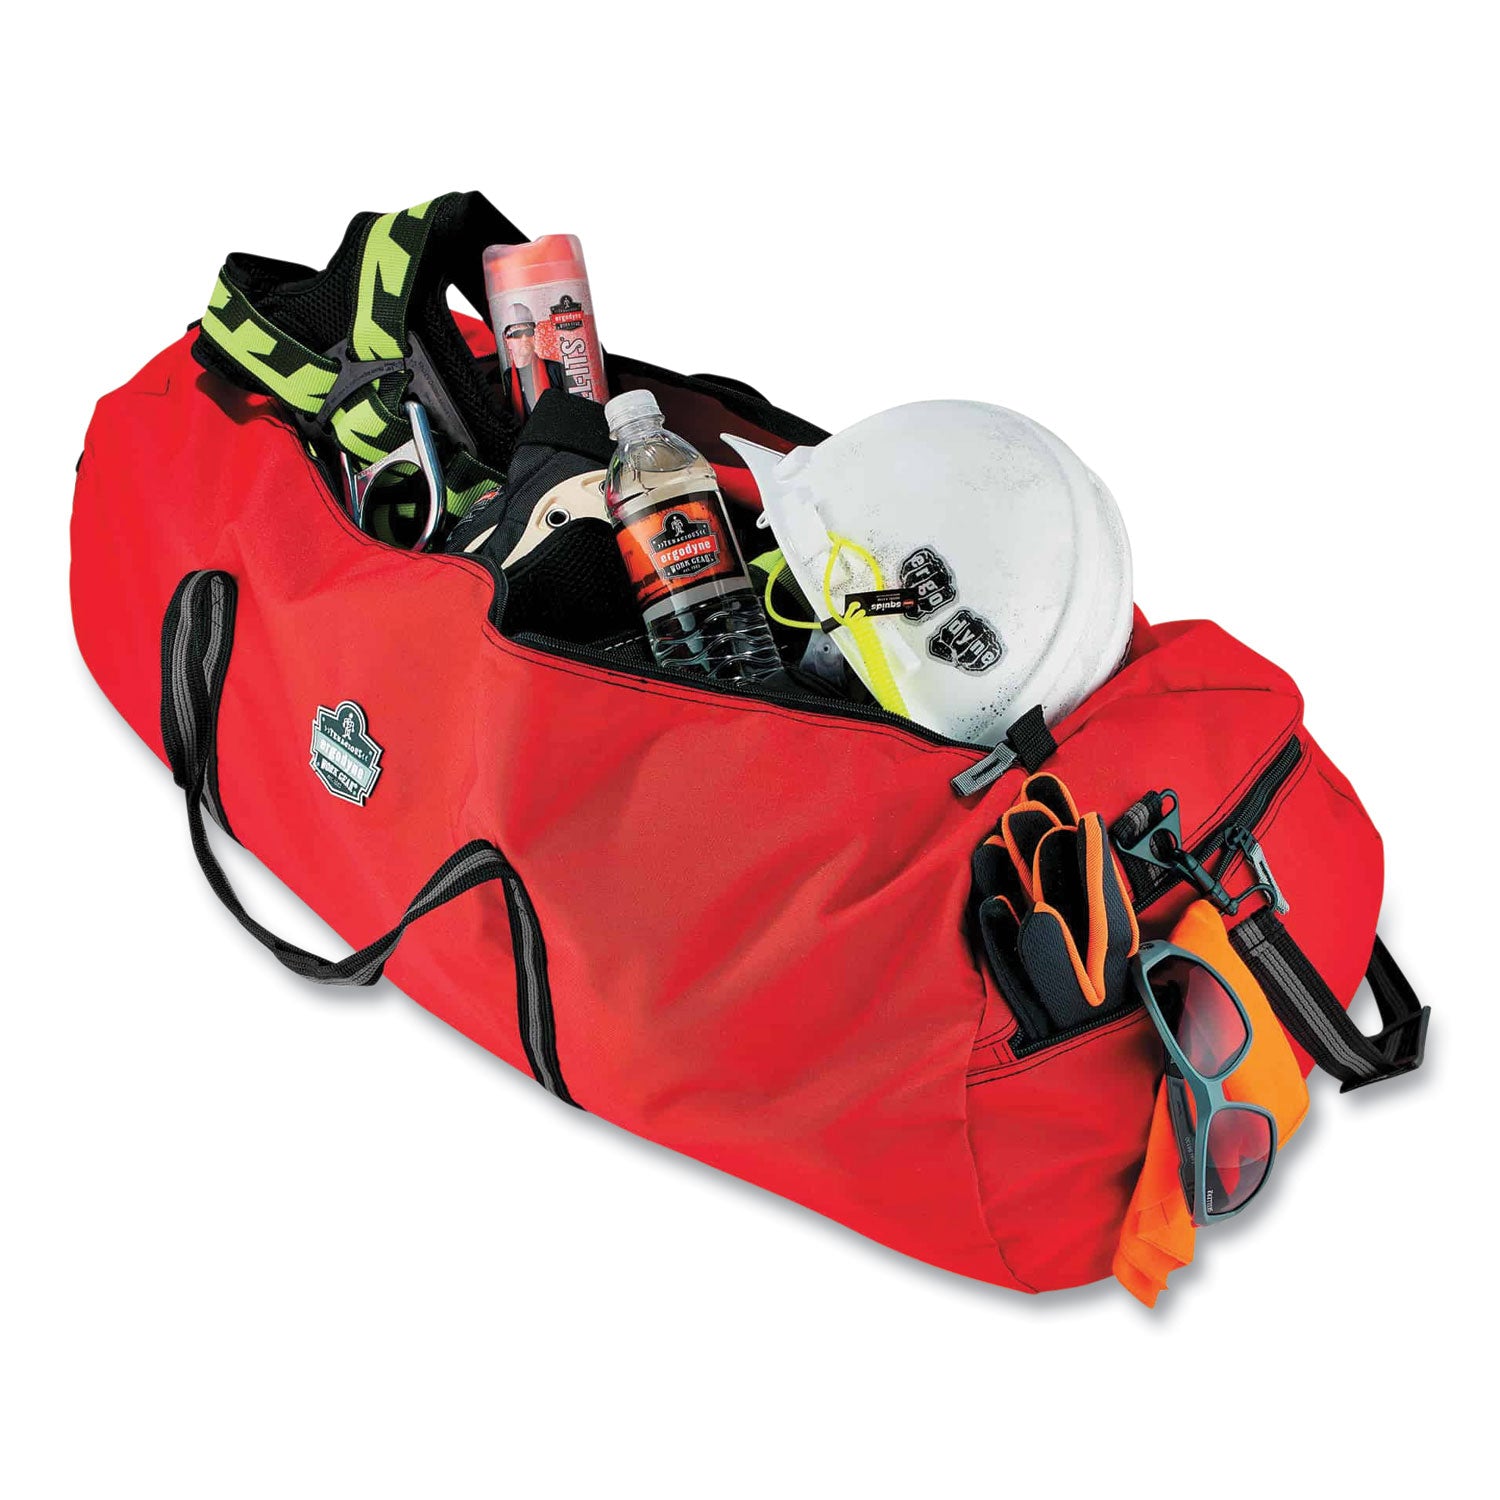 arsenal-5020-gear-duffel-bag-nylon-large-14-x-35-x-14-red-ships-in-1-3-business-days_ego13022 - 2